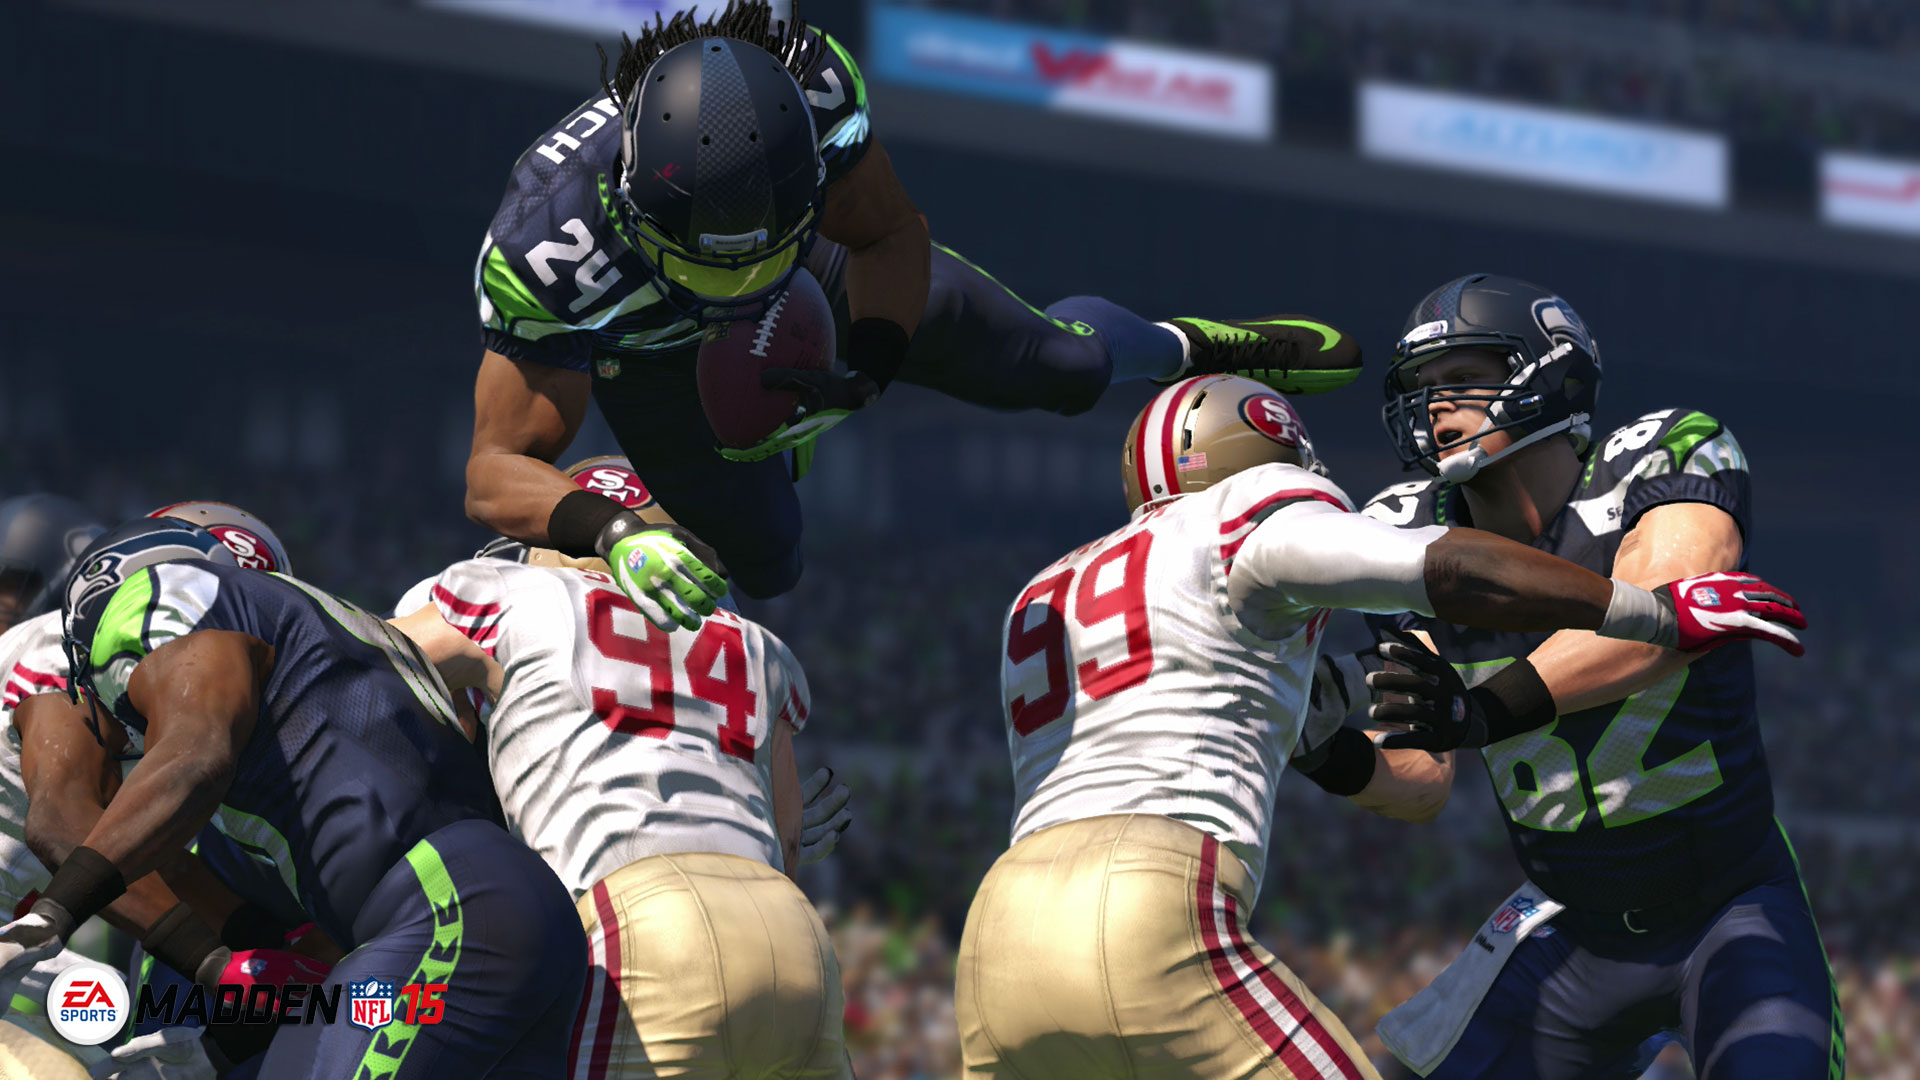 Madden NFL 15 Screenshot Xbox One PS4 PS3 360